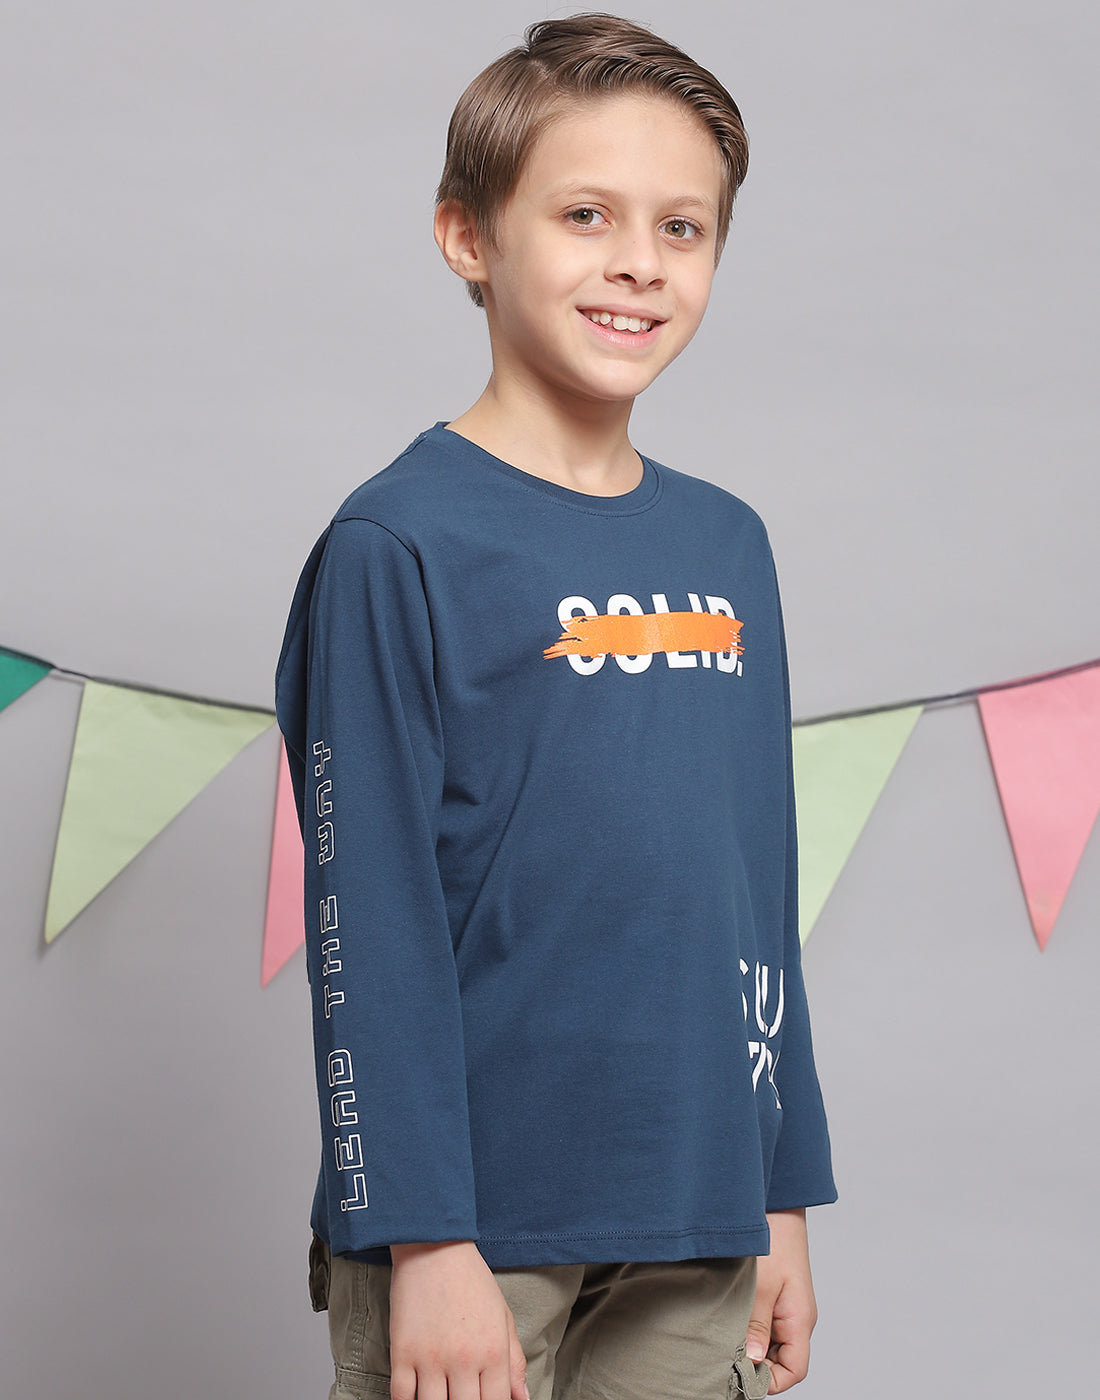 Boys Teal Blue Printed Round Neck Full Sleeve T-Shirts